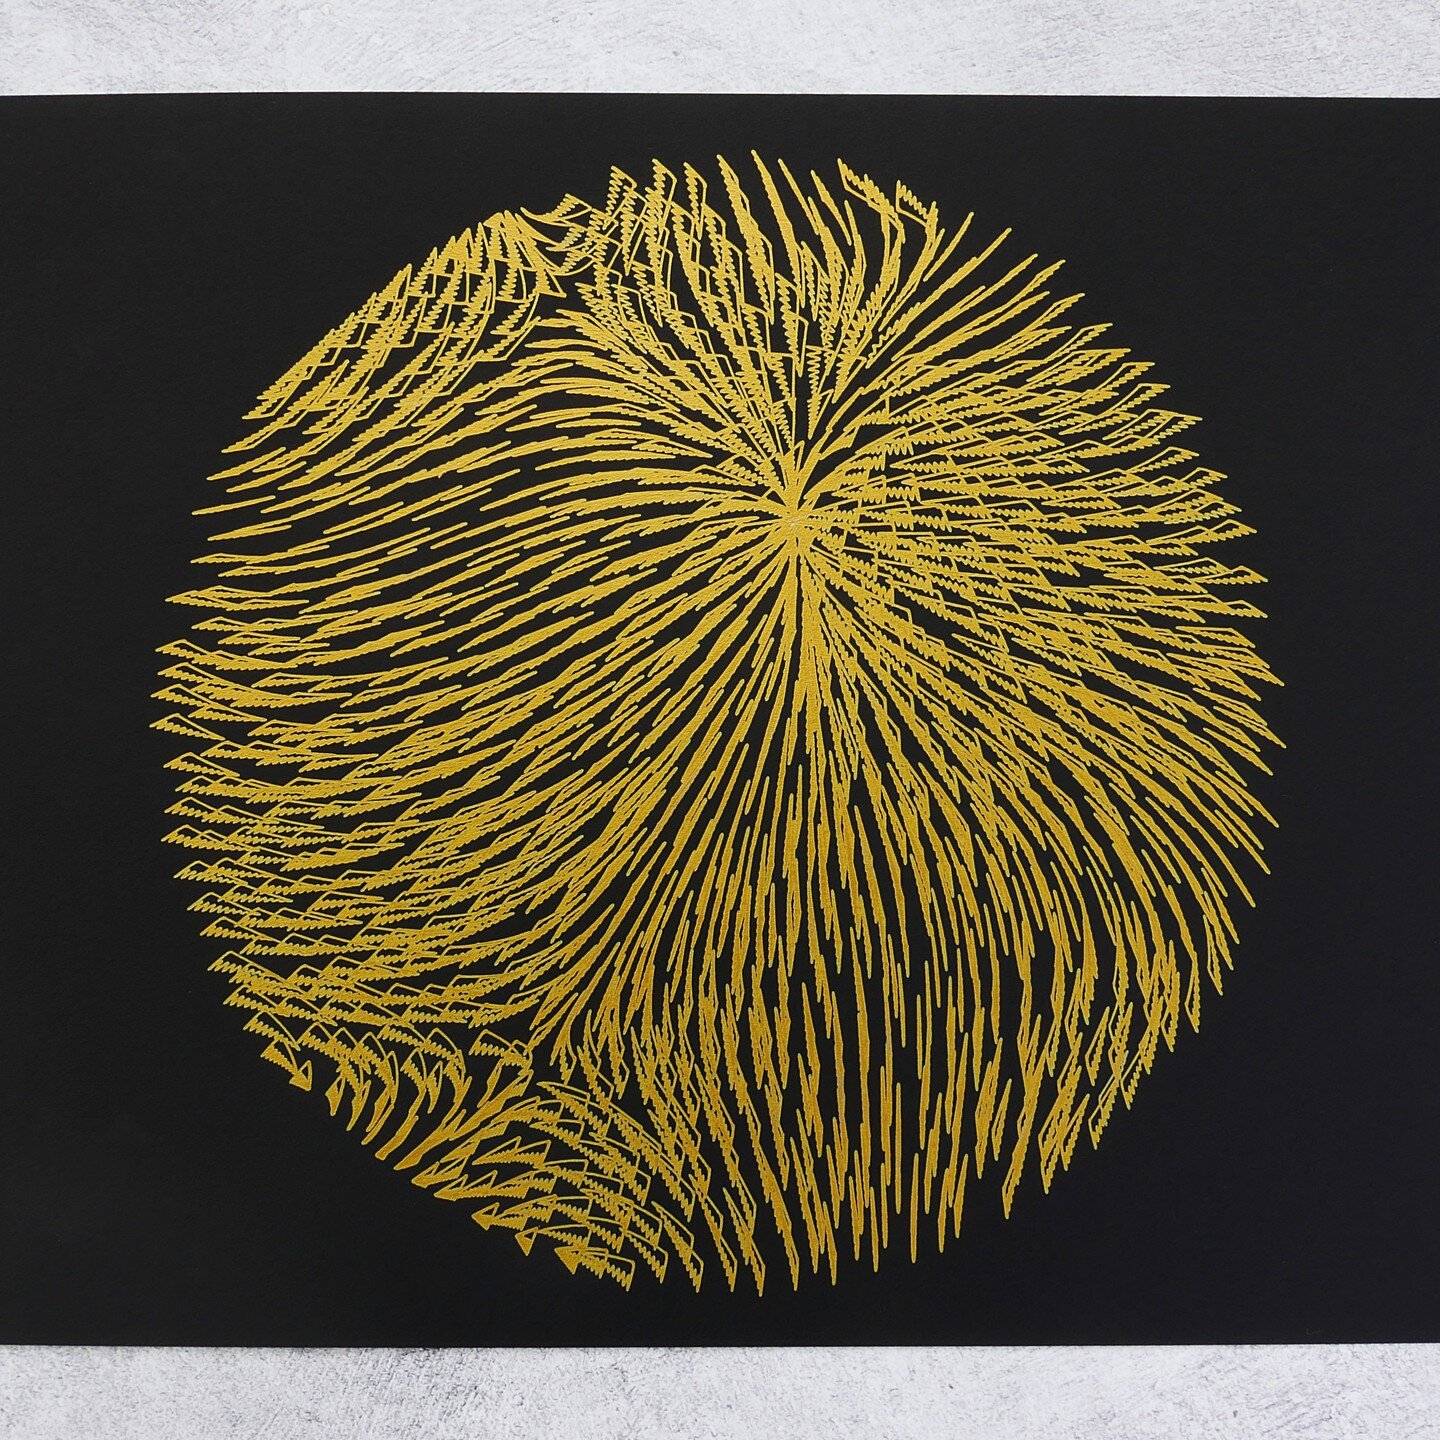 Golden Flow Fields.

Penny the Plotter had a bit of a break, but she is back in action. This drawing uses the principles of vector flow fields, but with a pho-3d effect. I was aiming to give each stroke a little attitude, and ended up with these crow